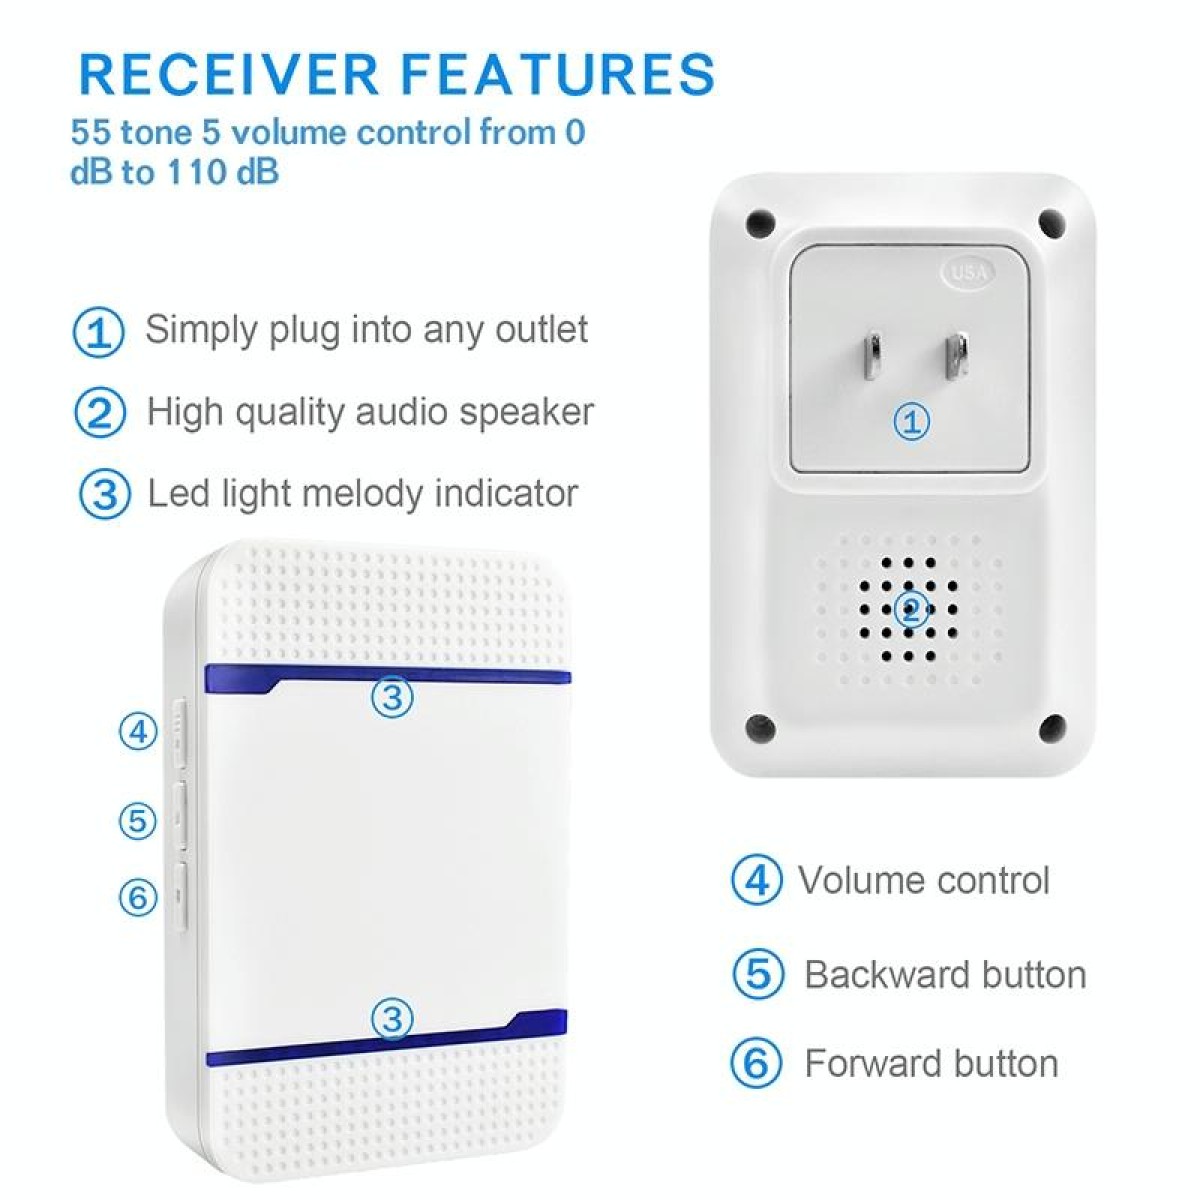 P7 110dB Wireless IP55 Waterproof Low Power Consumption WiFi Doorbell Receiver with Night Light , 53 Music Options, Receiver Distance: 300m (White)